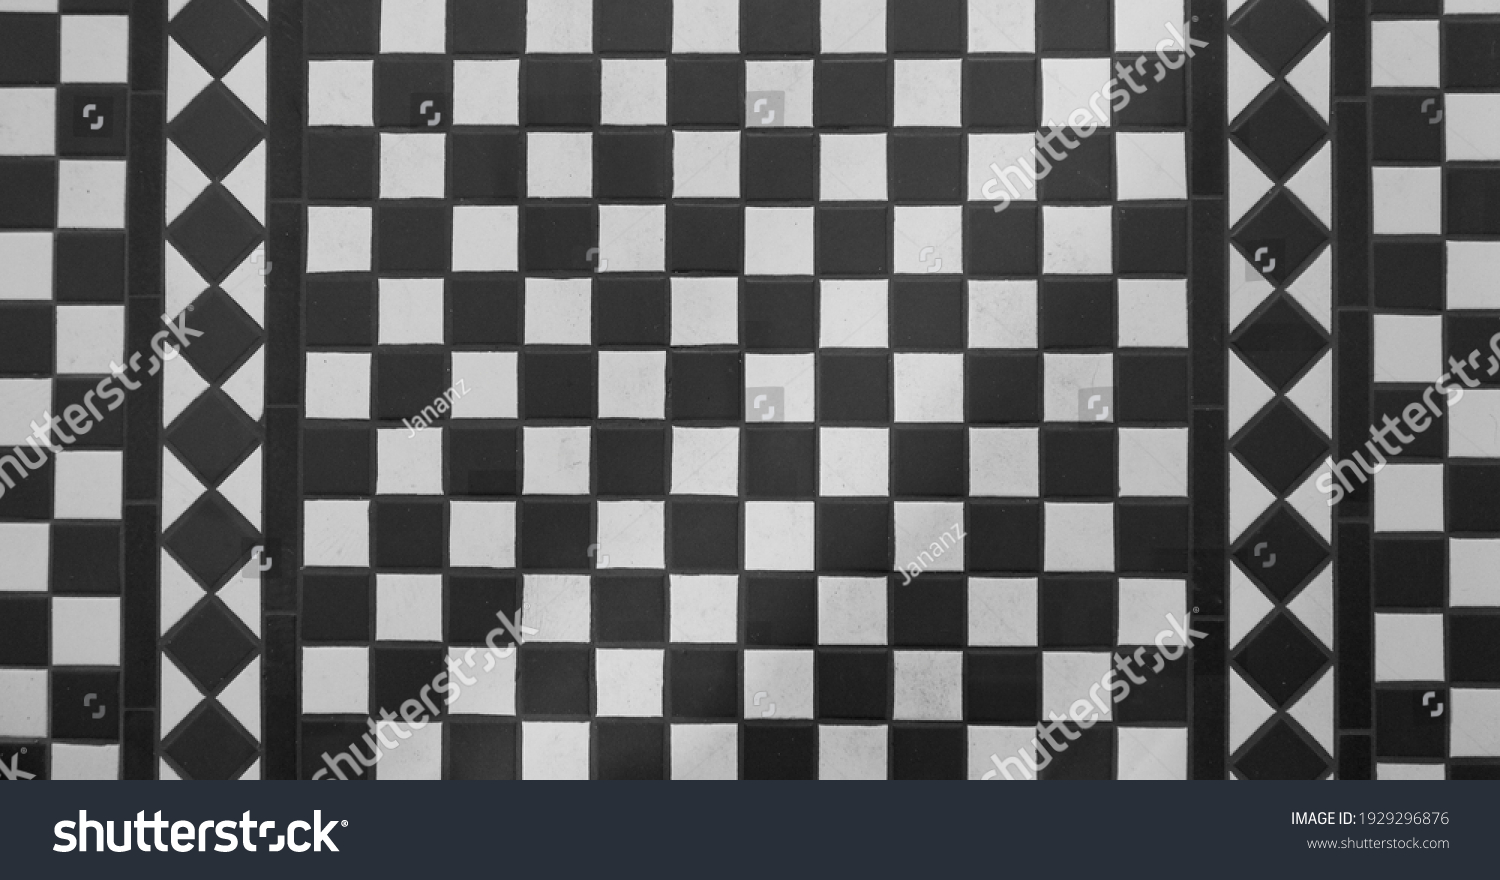 View of black and white tiled chequered Victorian floor from above #1929296876